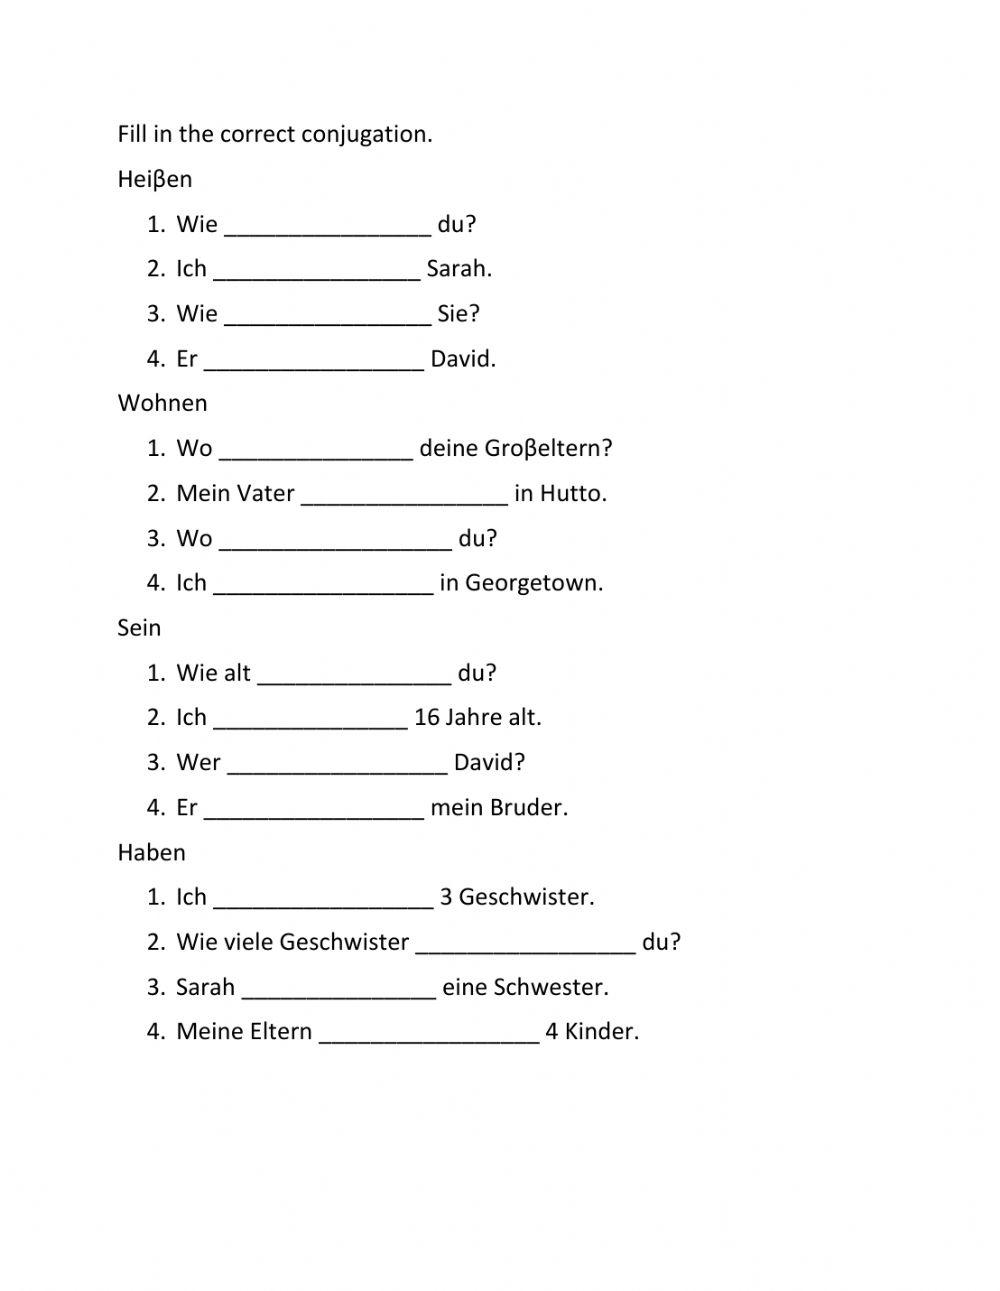 Conjugation fill in the blanks